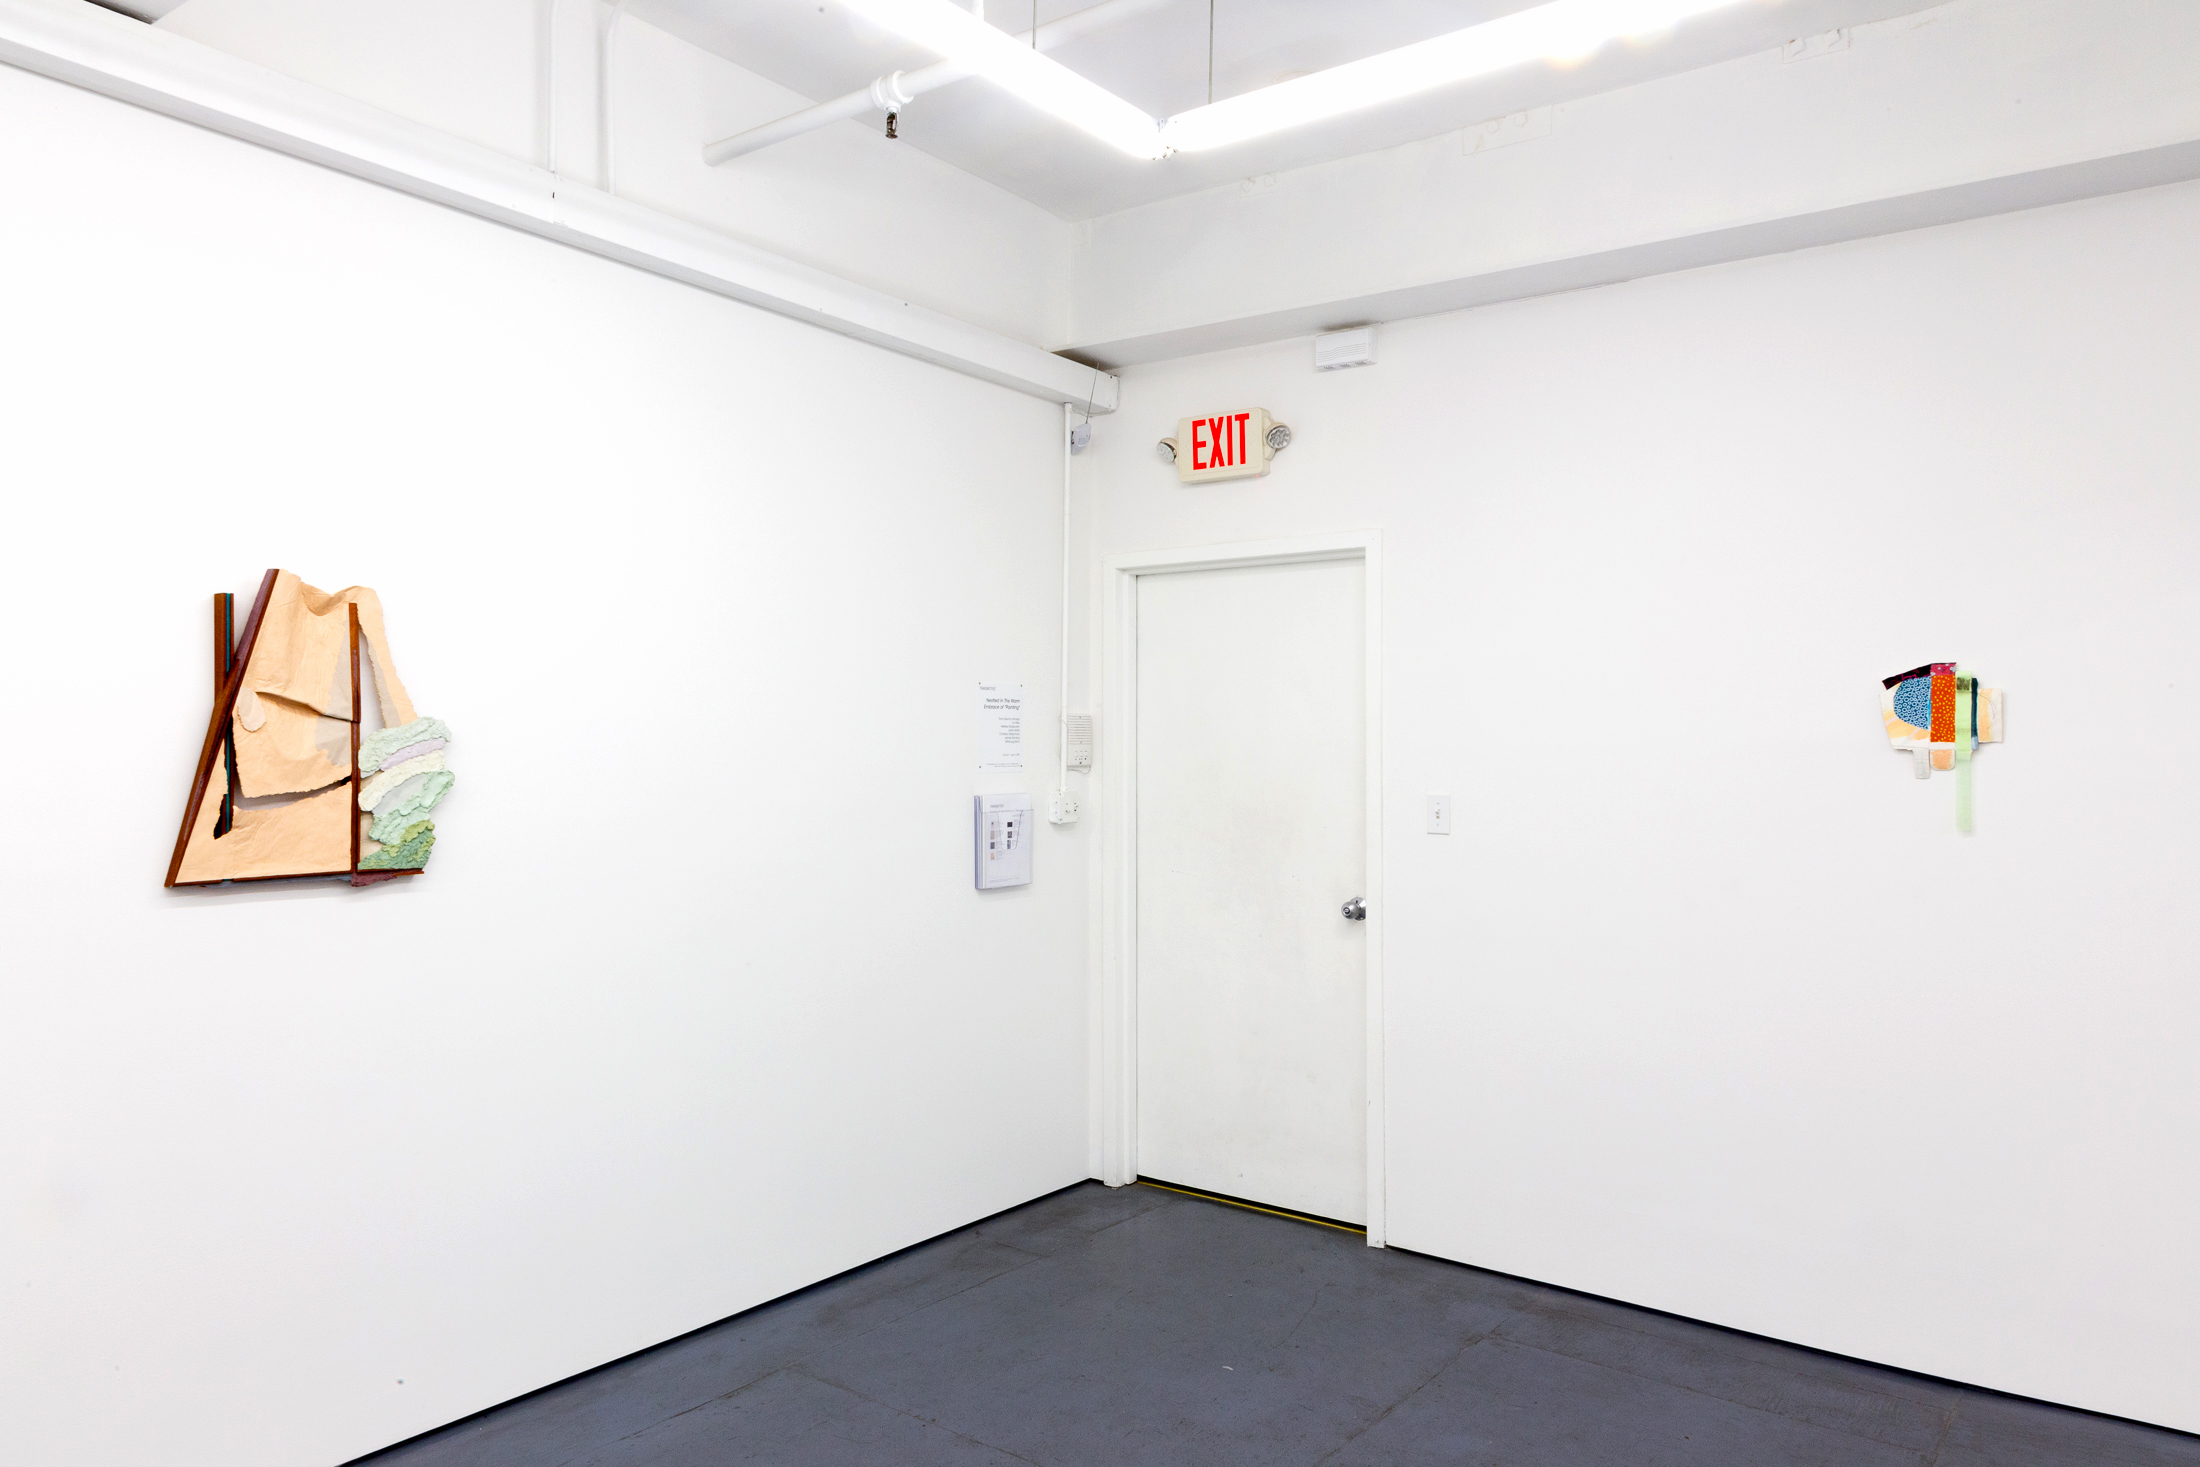  Installation view of Nestled in the Warm Embrace in “Painting” at Transmitter 